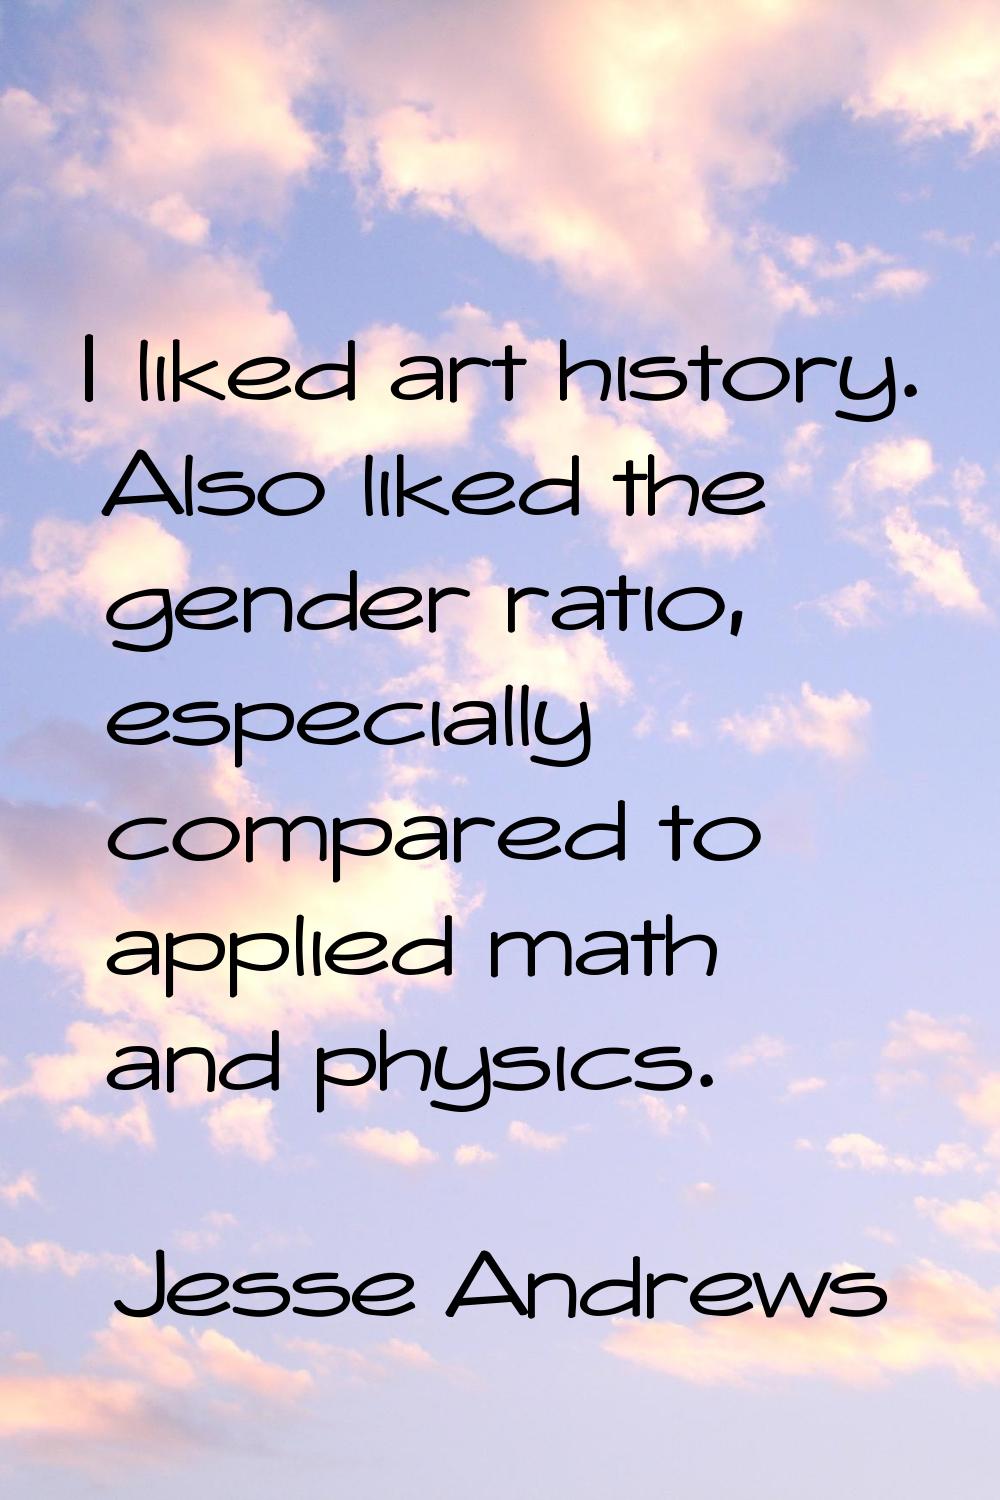 I liked art history. Also liked the gender ratio, especially compared to applied math and physics.